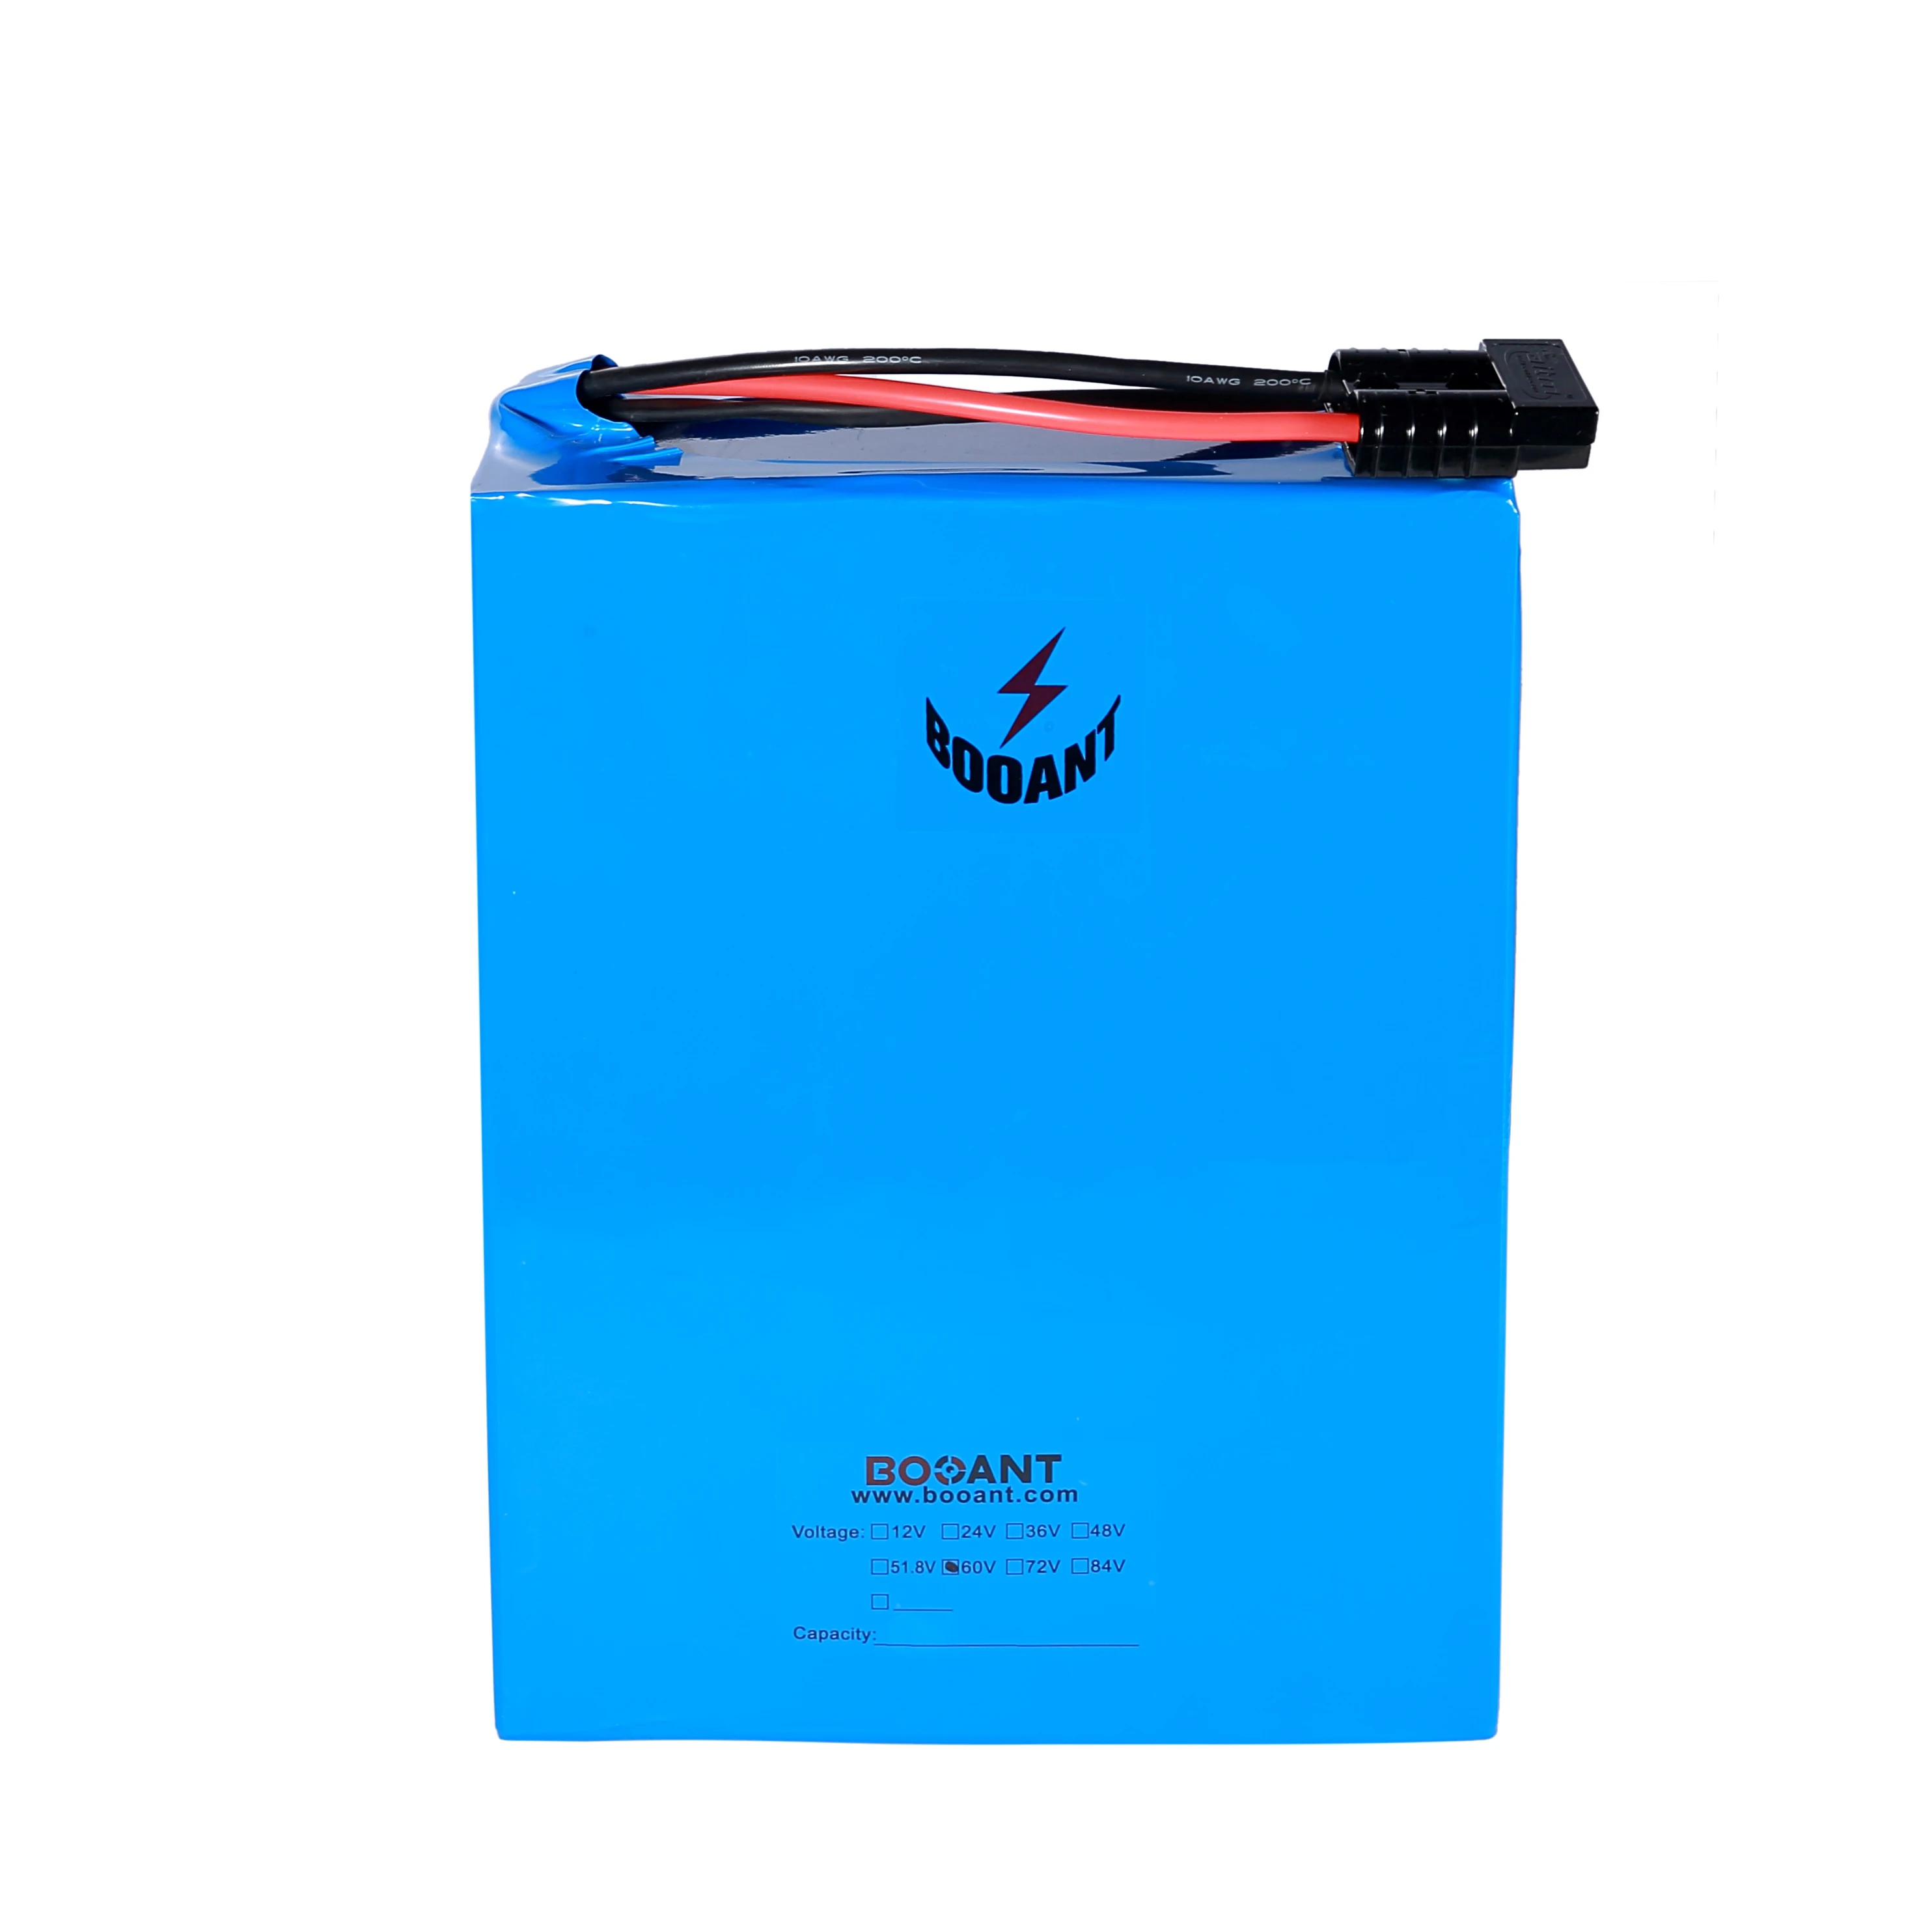 Excellent 60V 20AH 3000W E-bike Lithium Battery for Samsung 18650 30Q 5C cell Rechargeable Electric Bicycle Battery 60V with 5A Charger 2